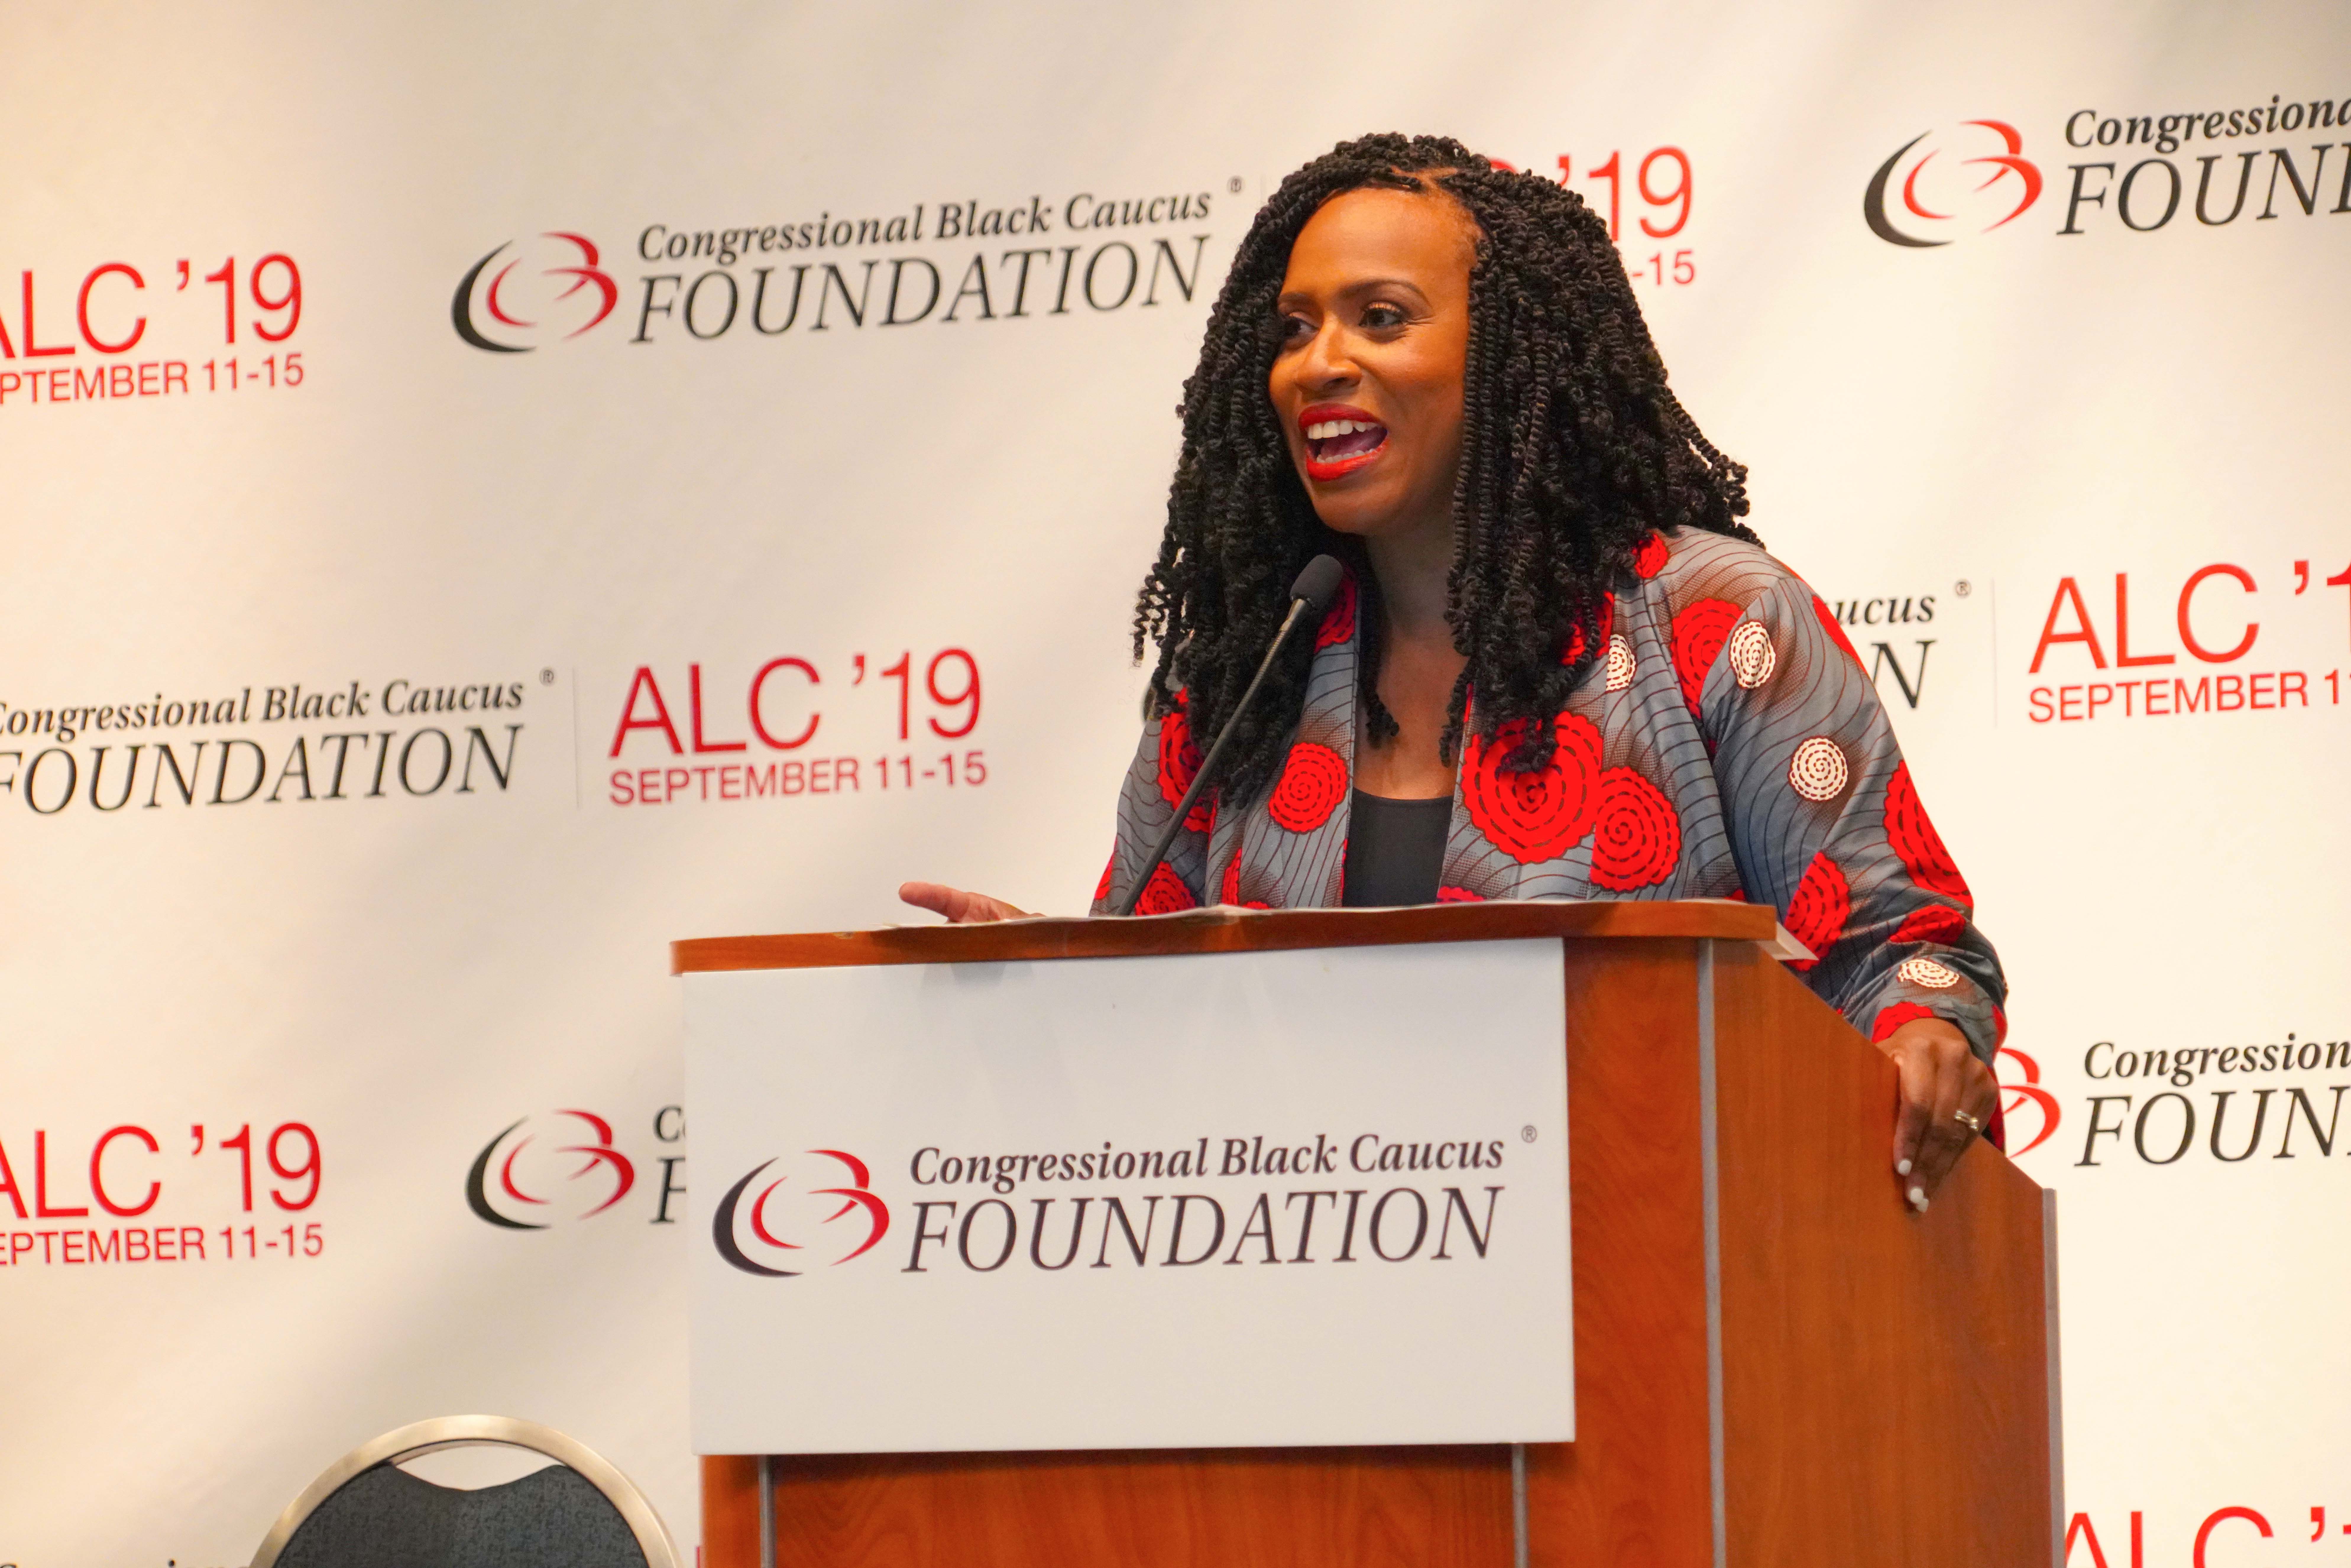 Congresswoman Ayanna Pressley Tackles The 'PUSHOUT' Of Black Girls At School